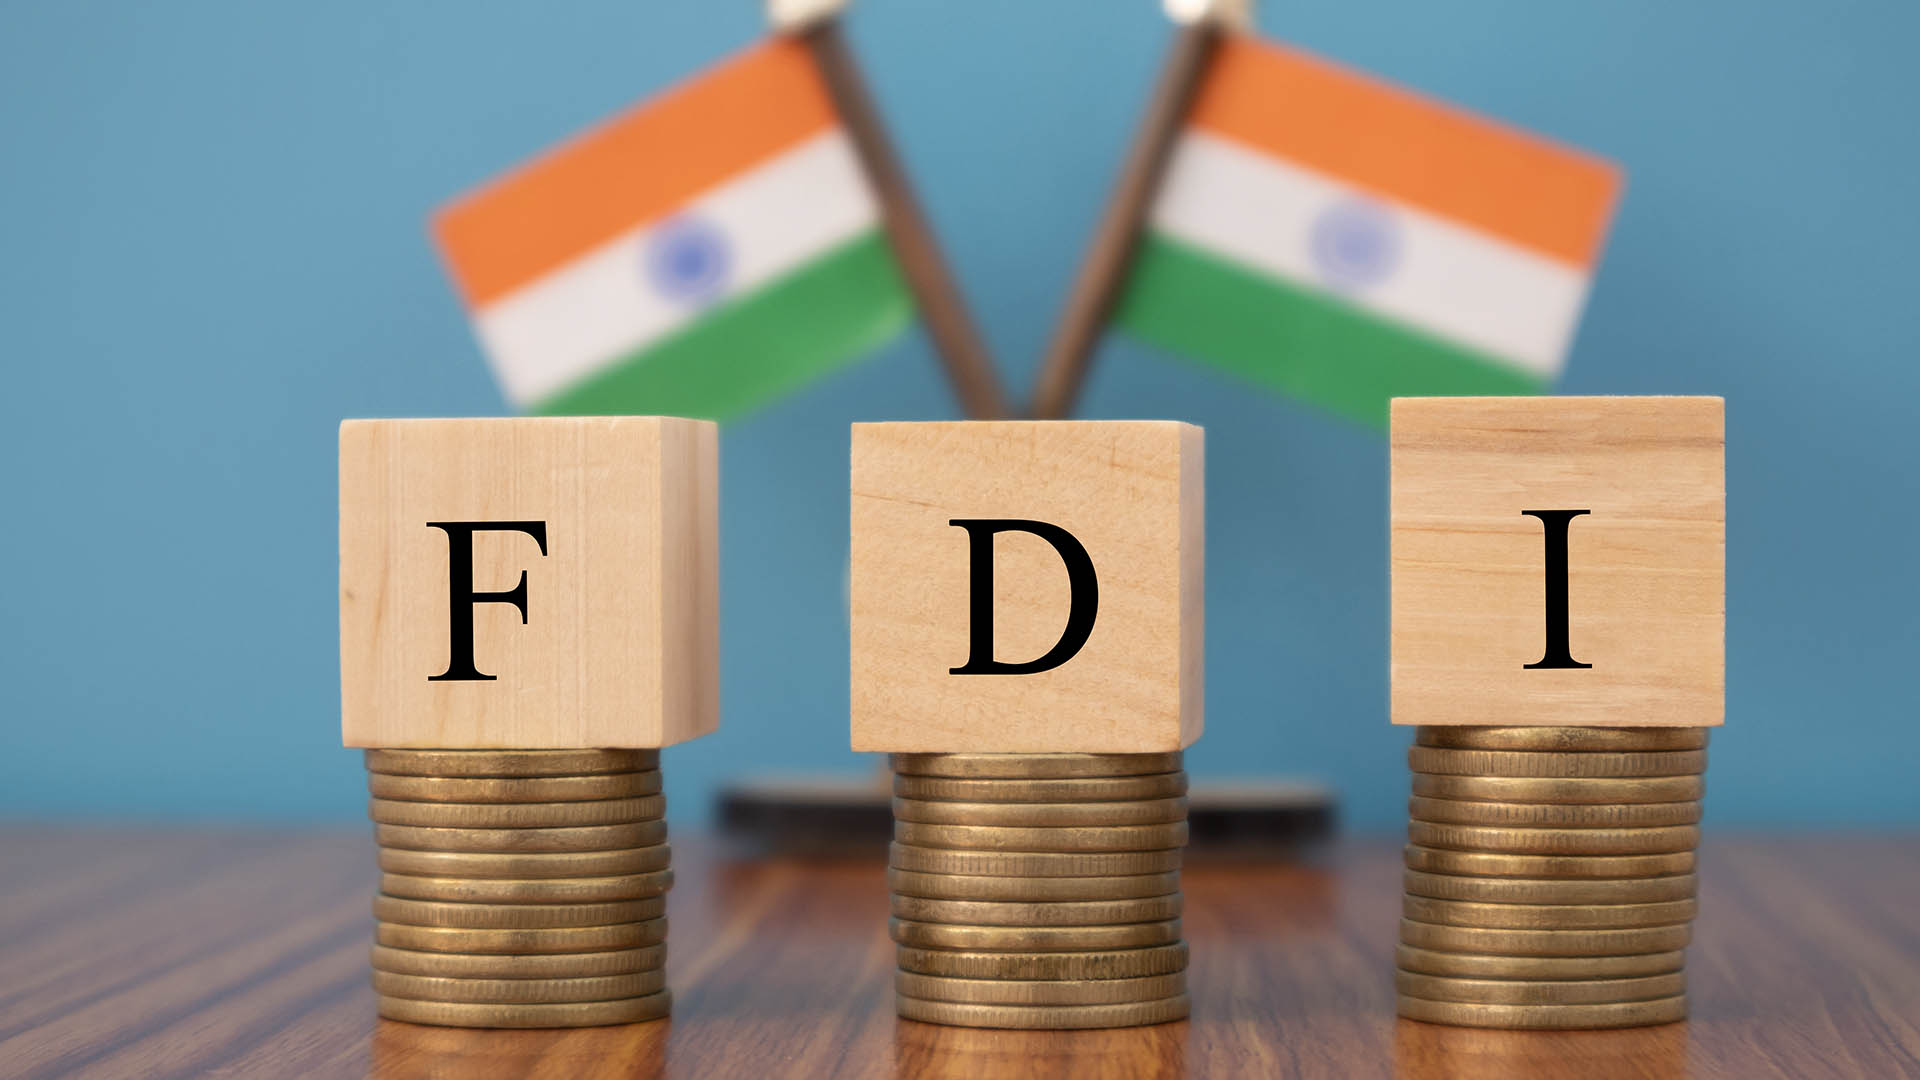 thesis on fdi in india